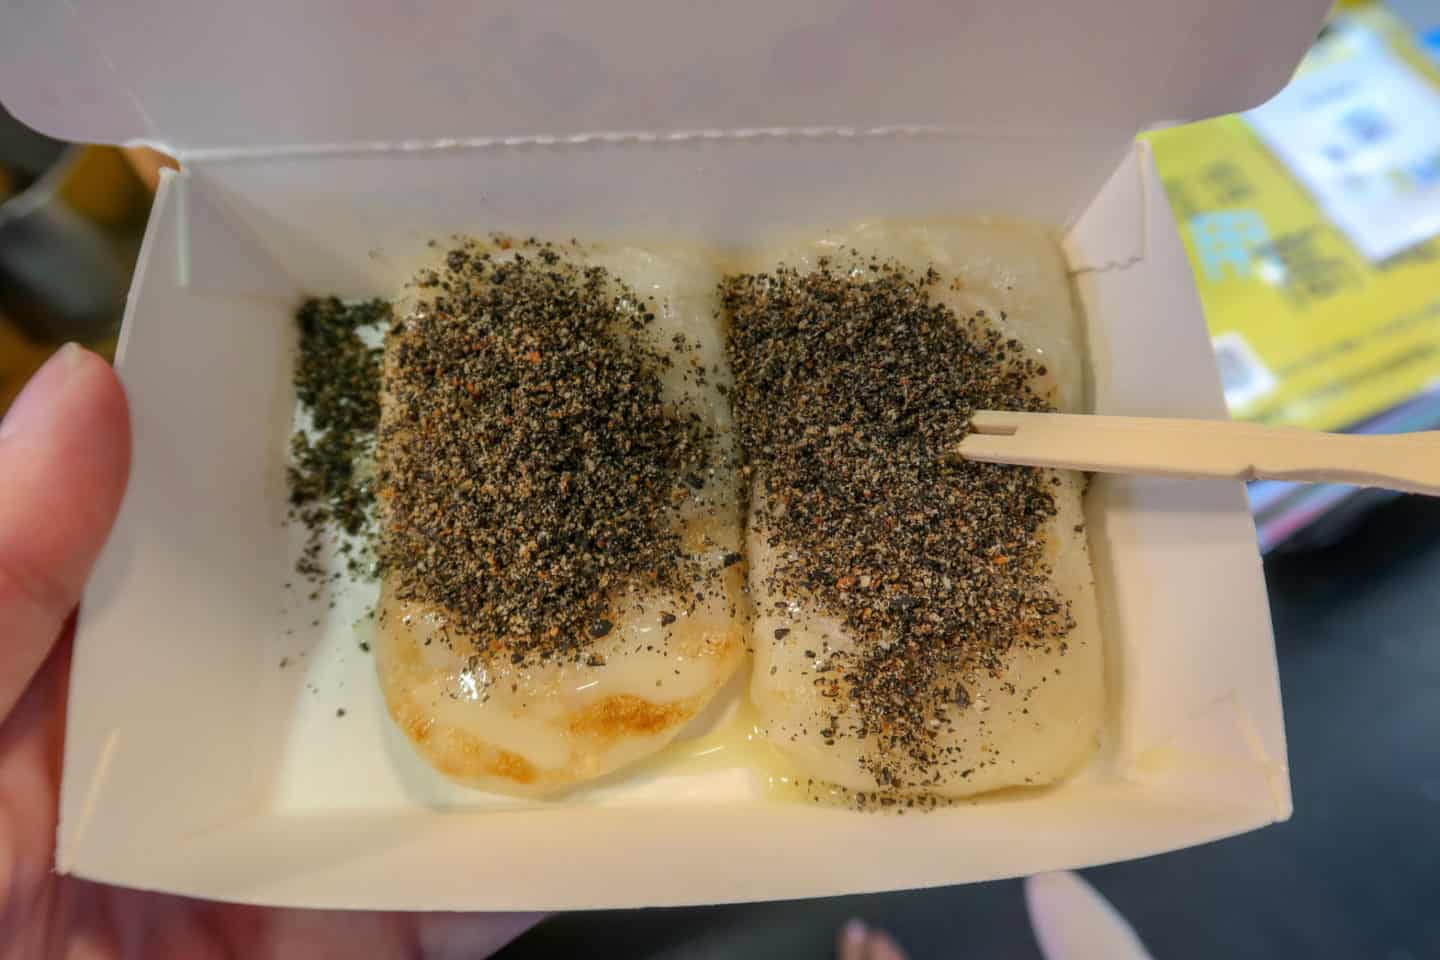 Kaohsiung Night Markets, sesame moche from Liohe night market